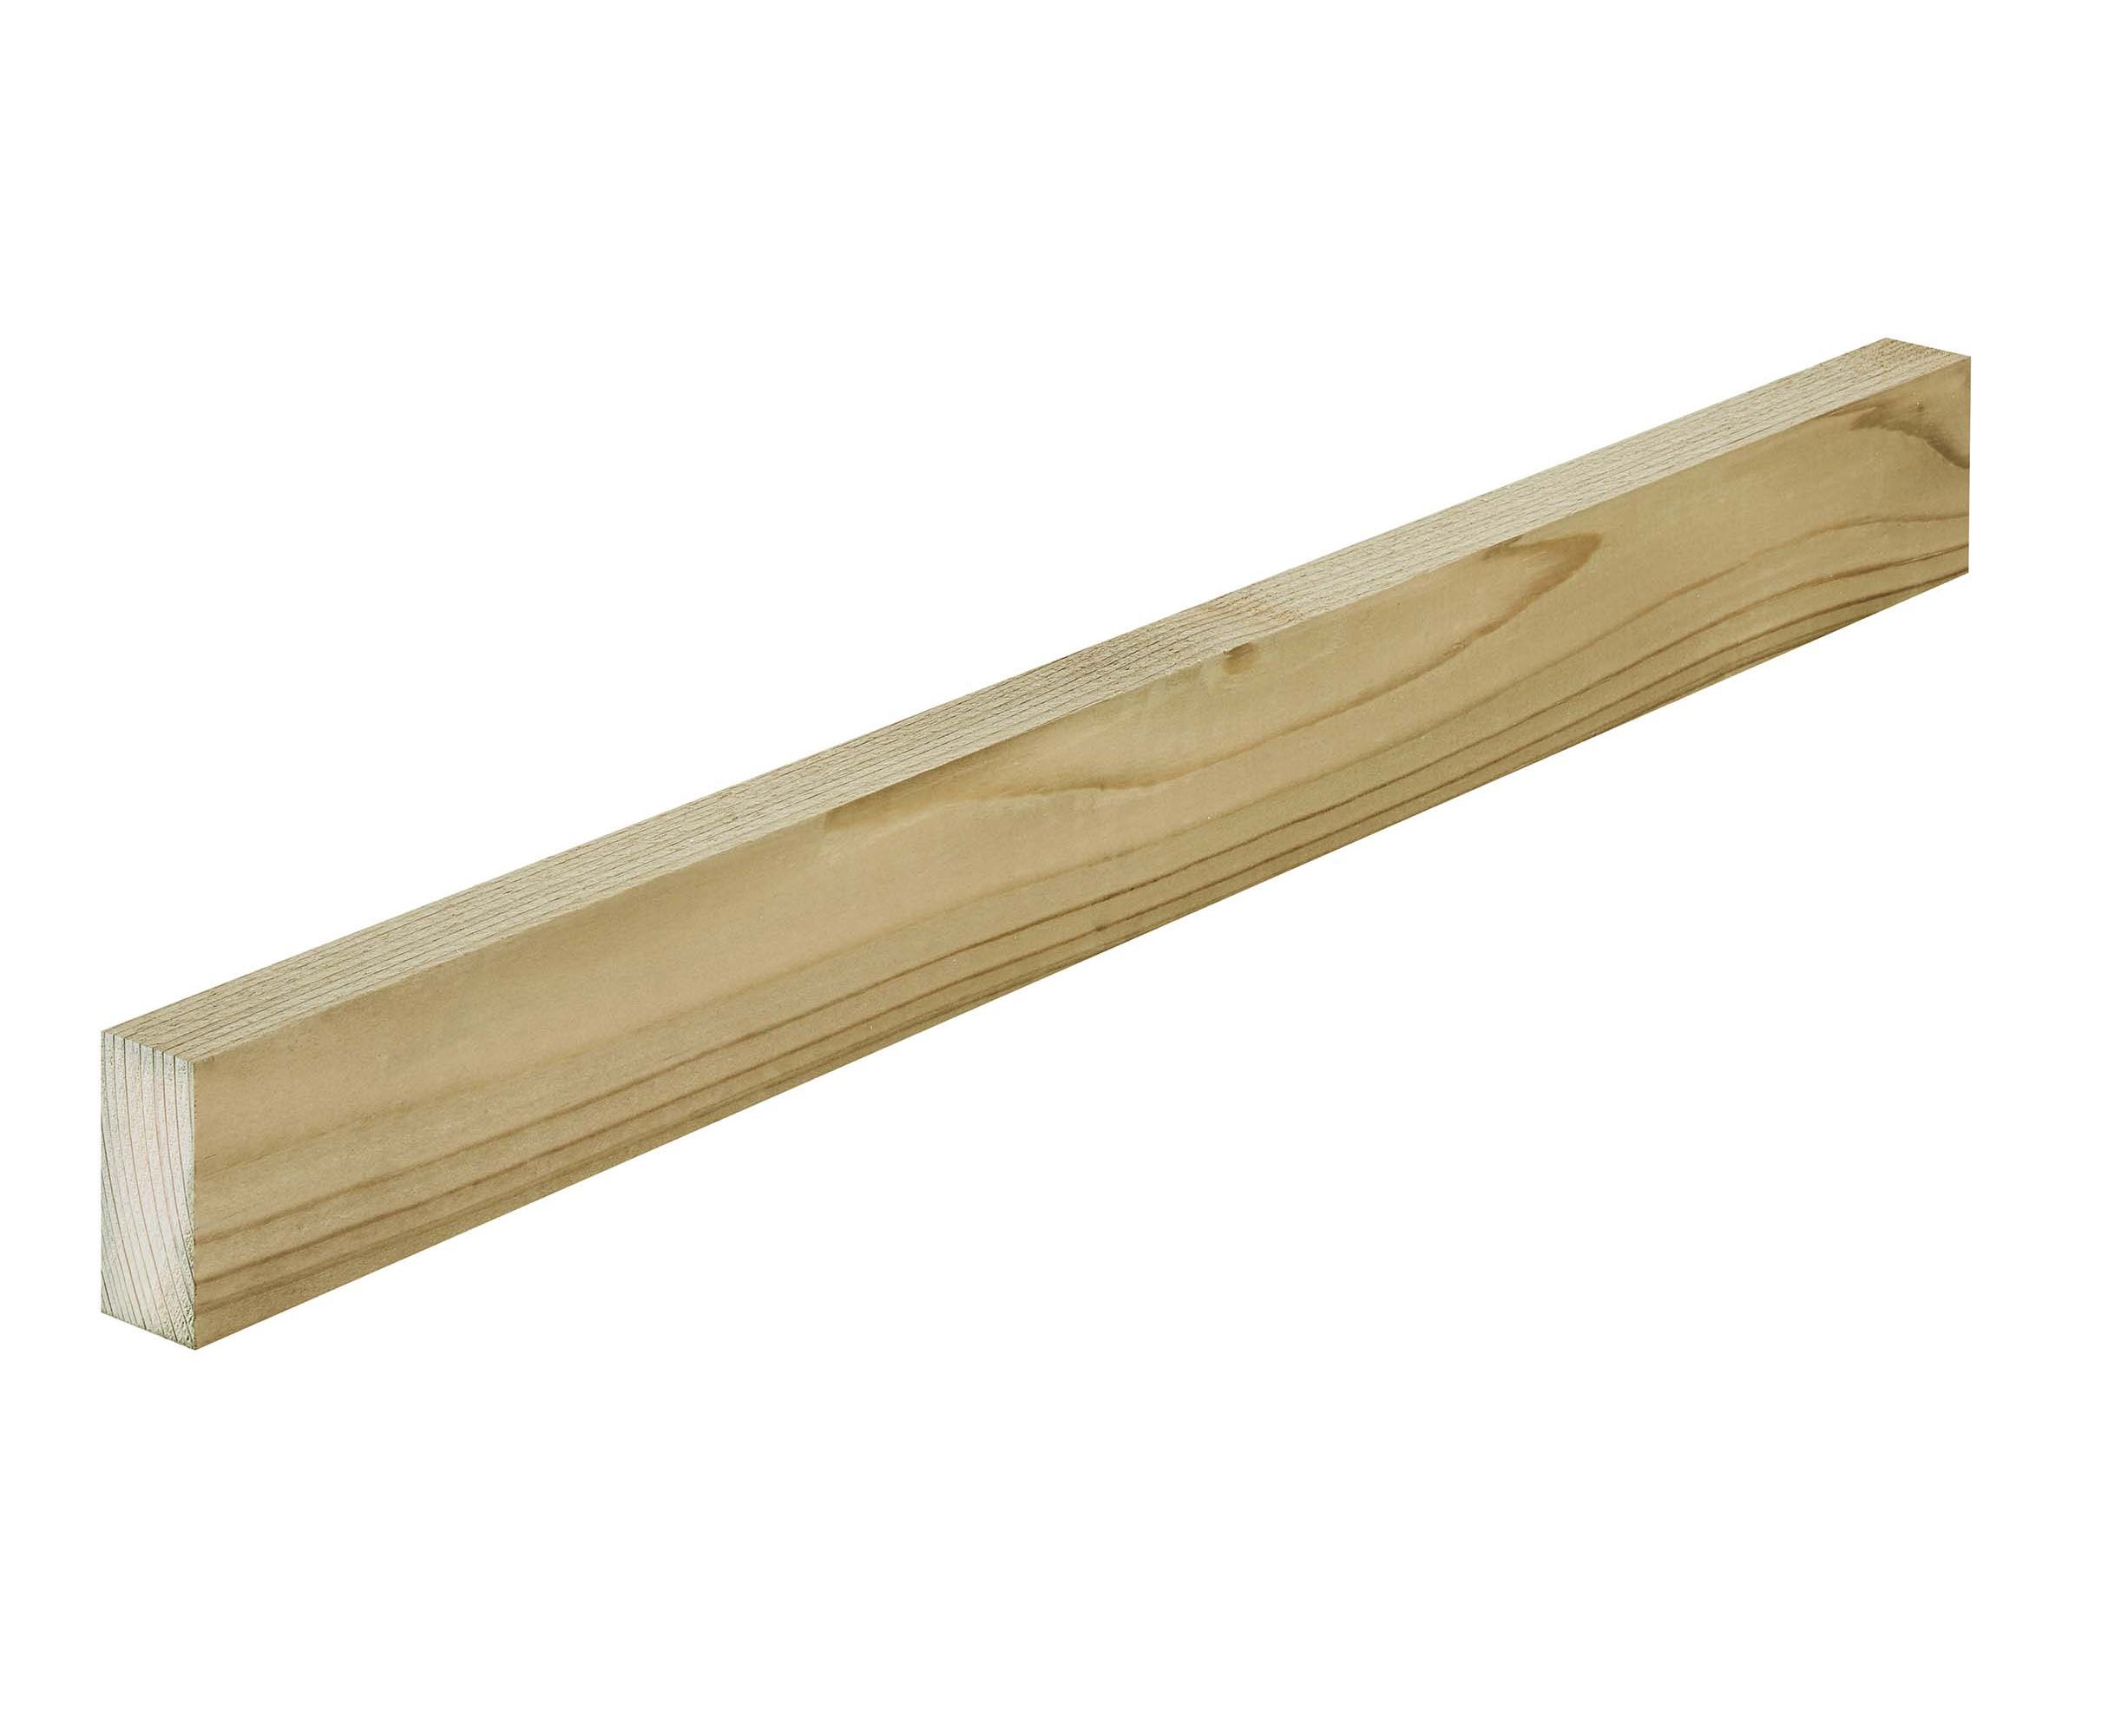 Rough Sawn Treated Stick timber (L)1.8m (W)38mm (T)22mm, Pack of 16